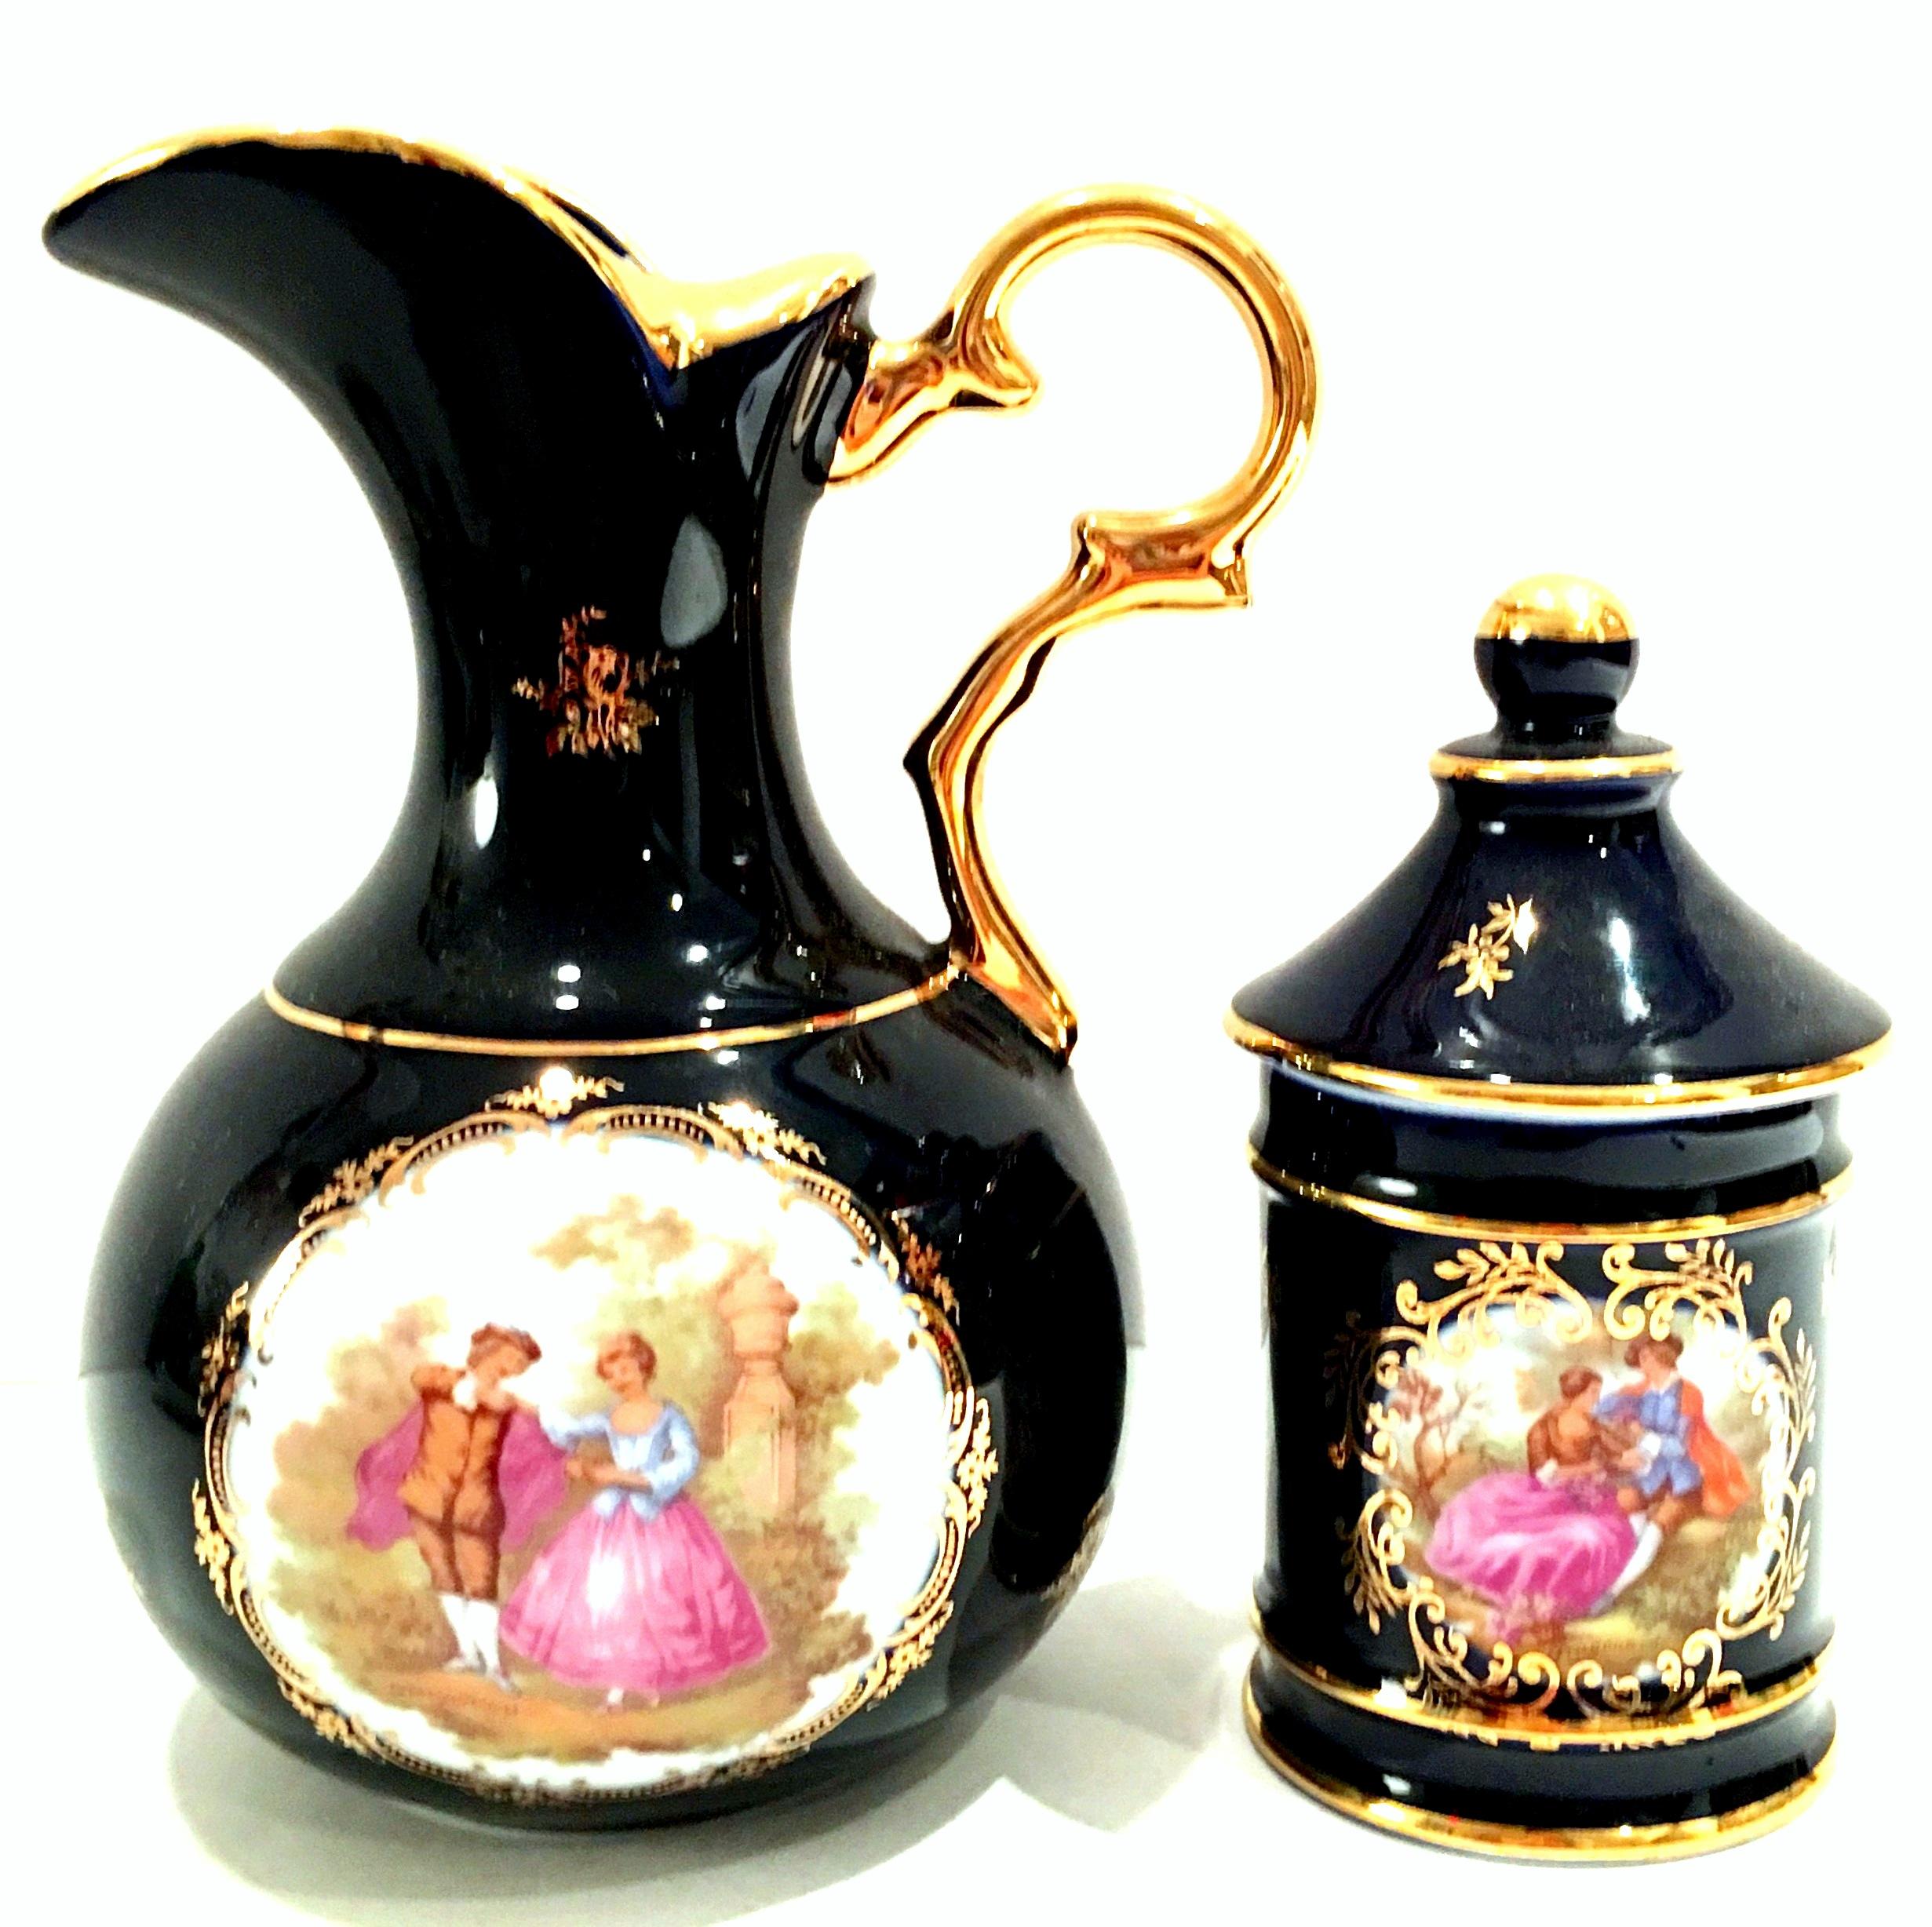 1950'S Cobalt & 22-karat gold detail hand painted Limoges France porcelain handled pitcher and lidded jar. This three-piece set includes a handled beverage pitcher depicting a courting couple and a lidded vanity jar. Each piece is signed on the